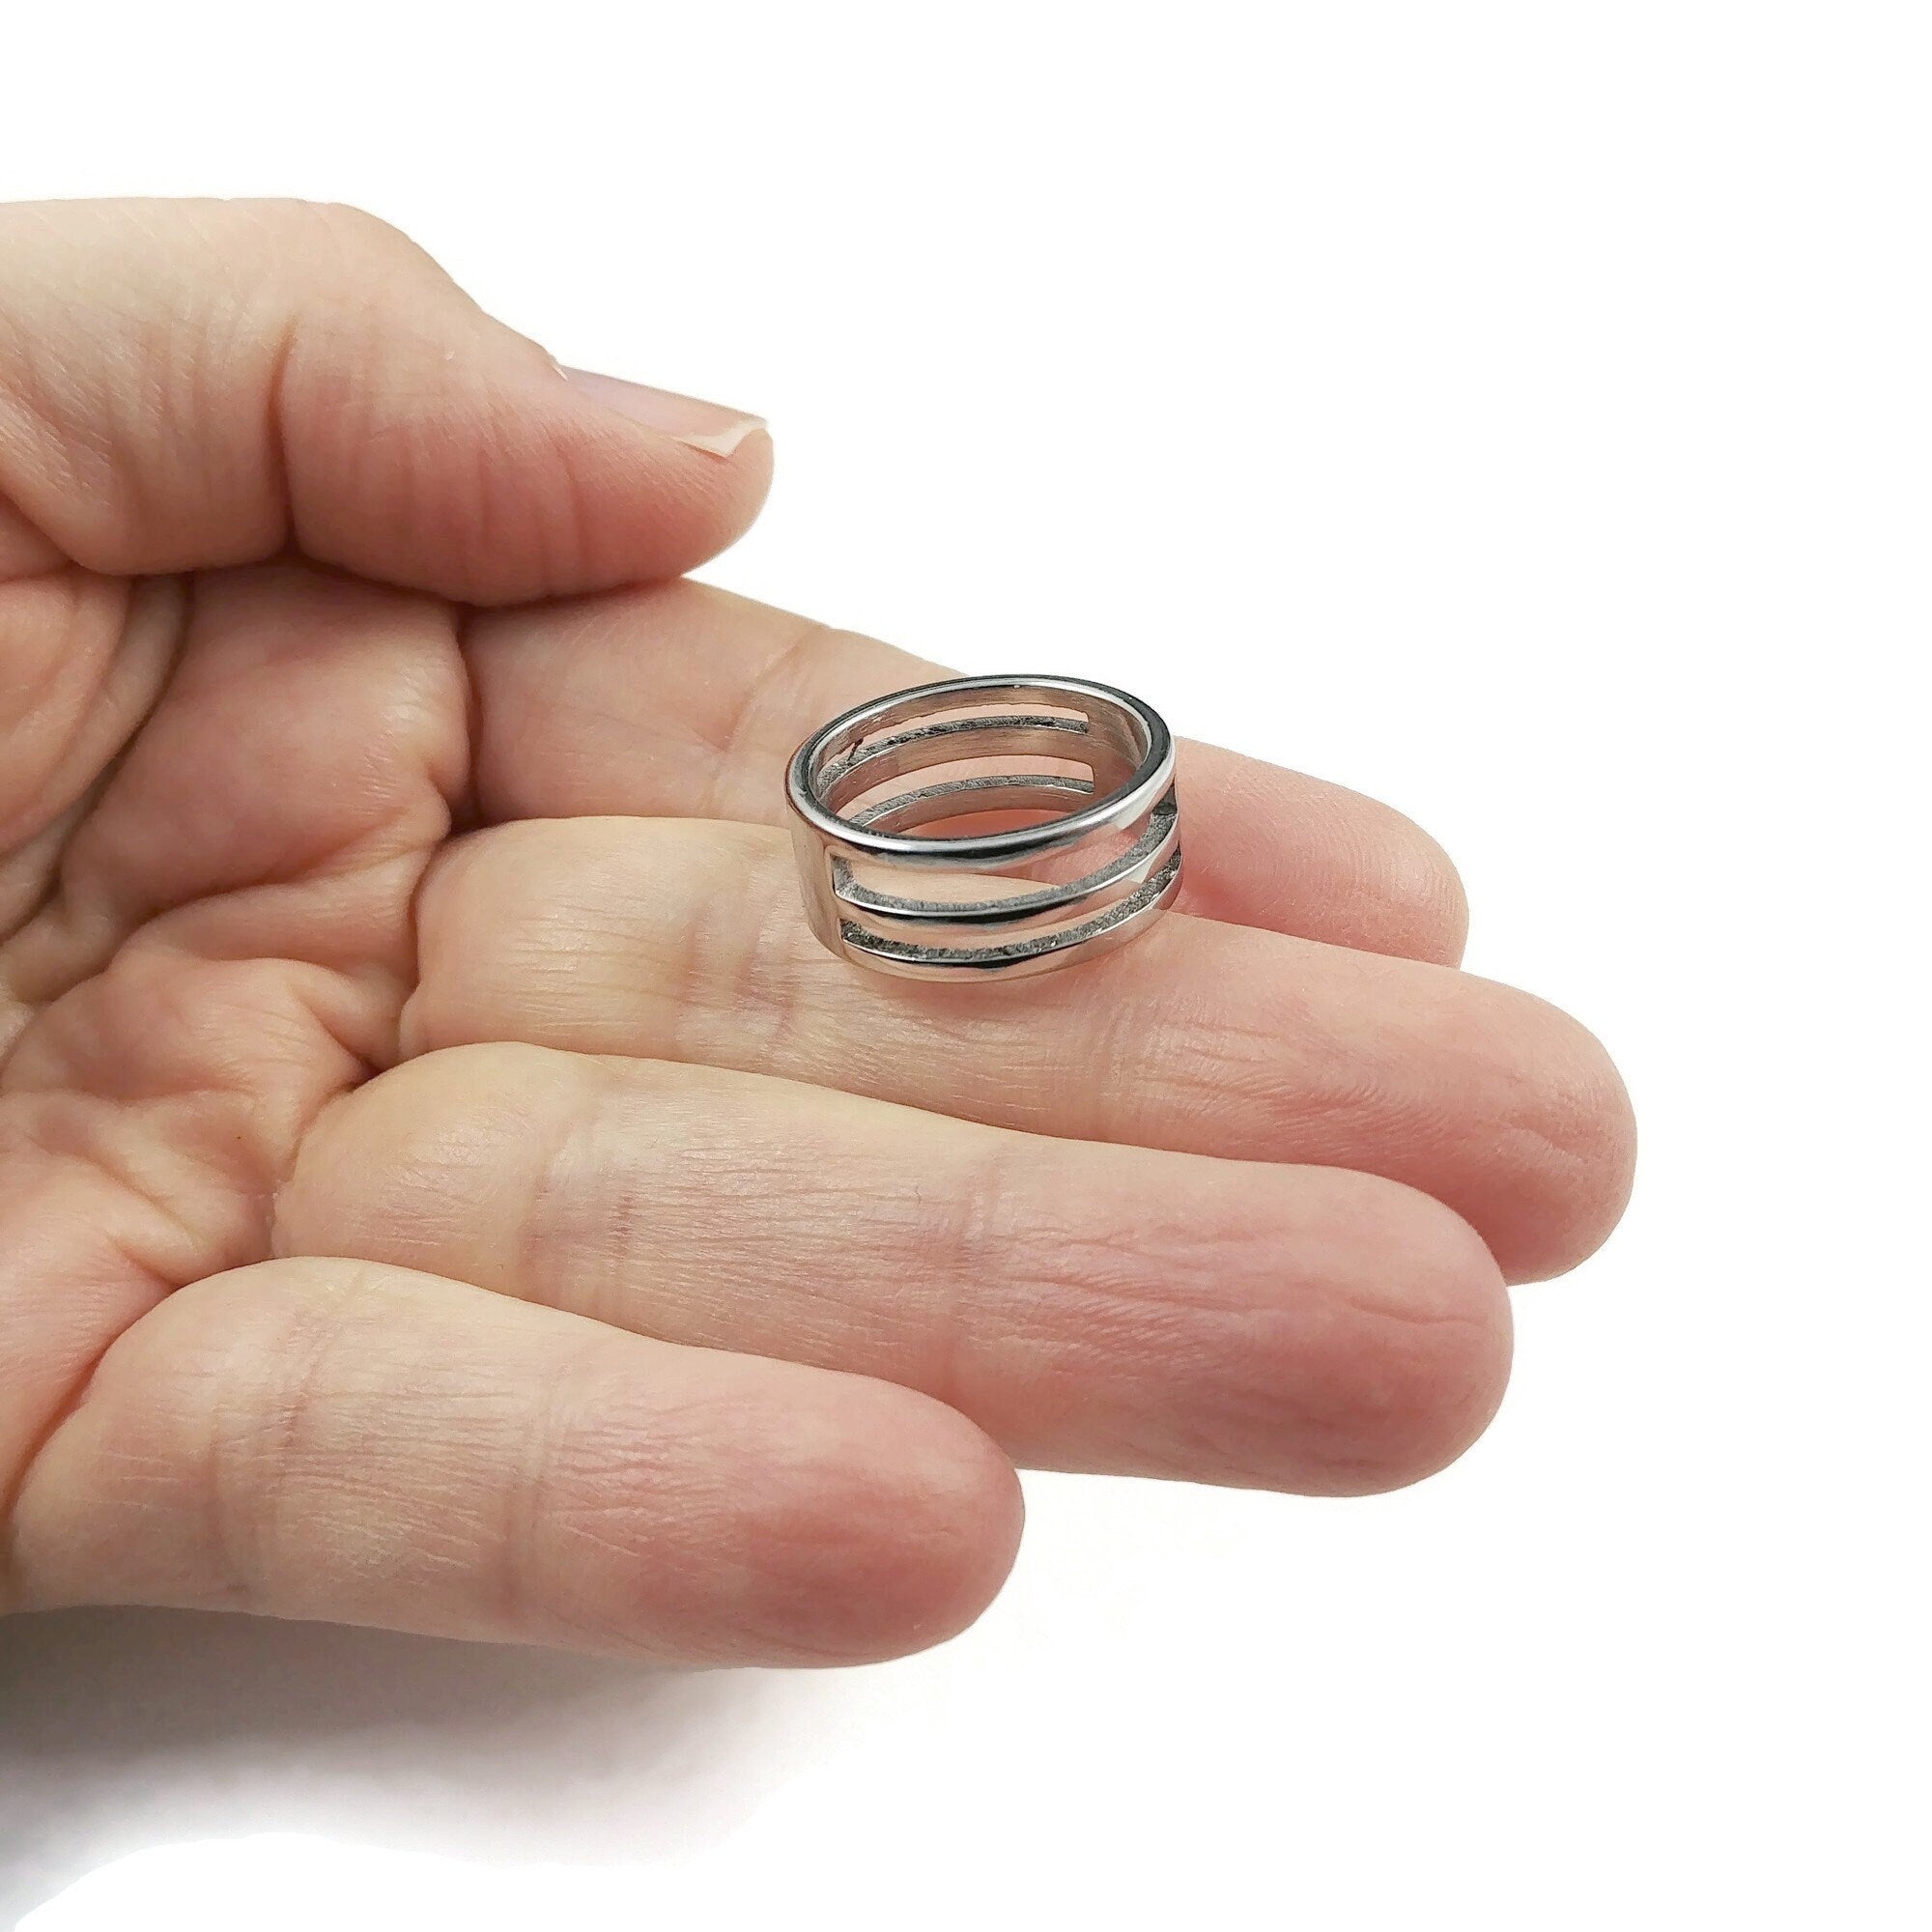 Stainless Steel Open Rings Jewelry Making